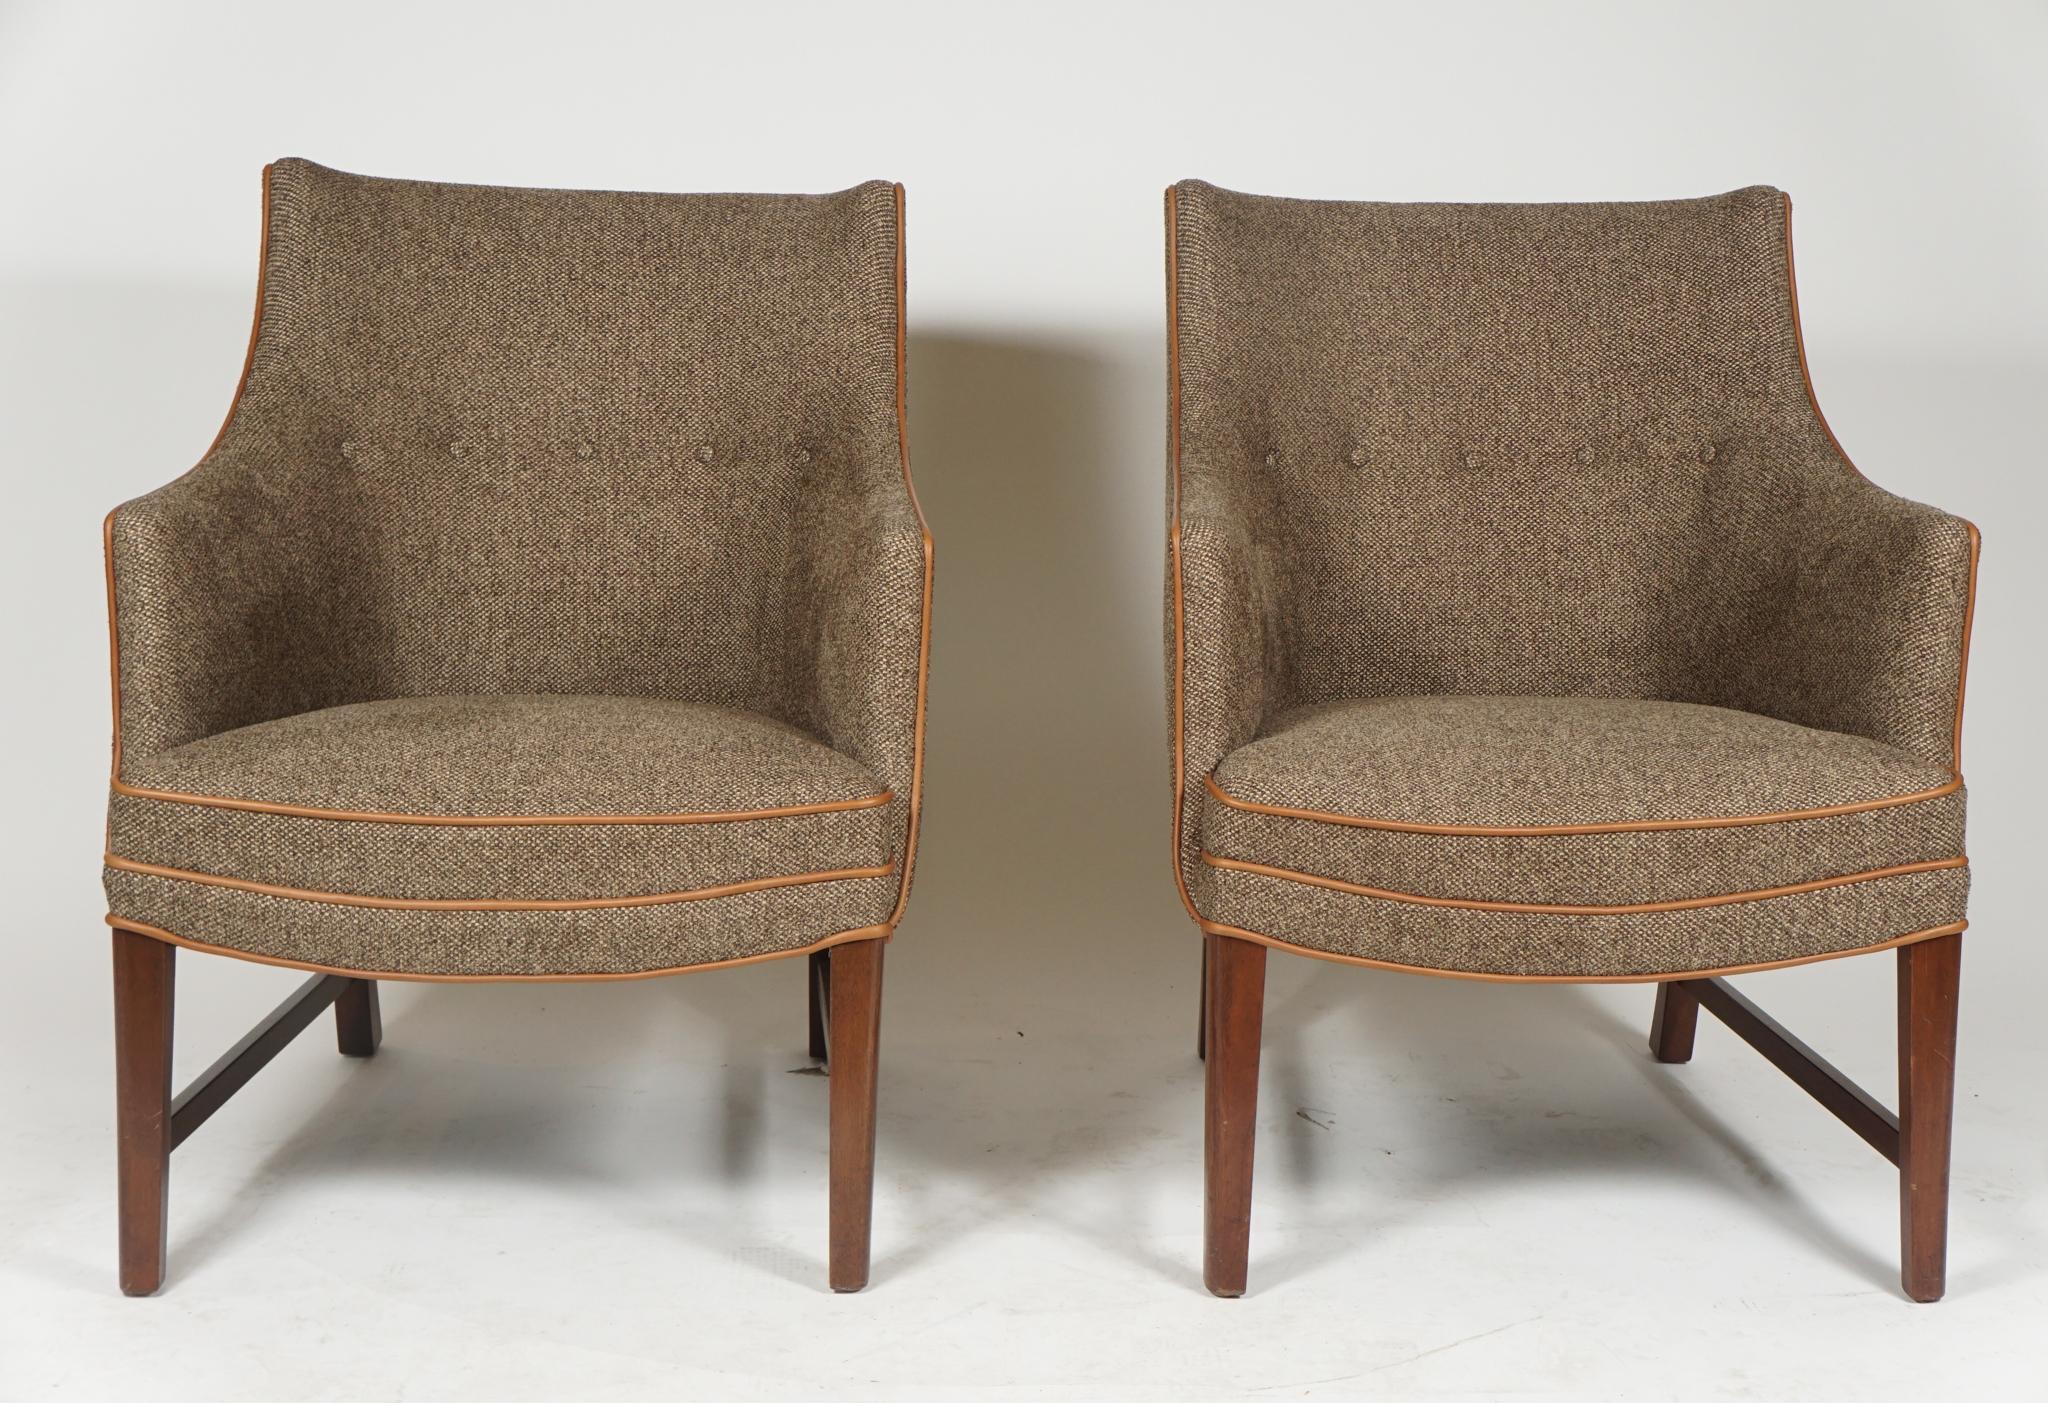 A pair of Danish modern armchairs by noted designer, Frits Henningsen, from the 1940s, newly upholstered in a light beige tweed with beige leather piping and with mahogany frames, the curved arms and relaxed back made for comfortable sitting.